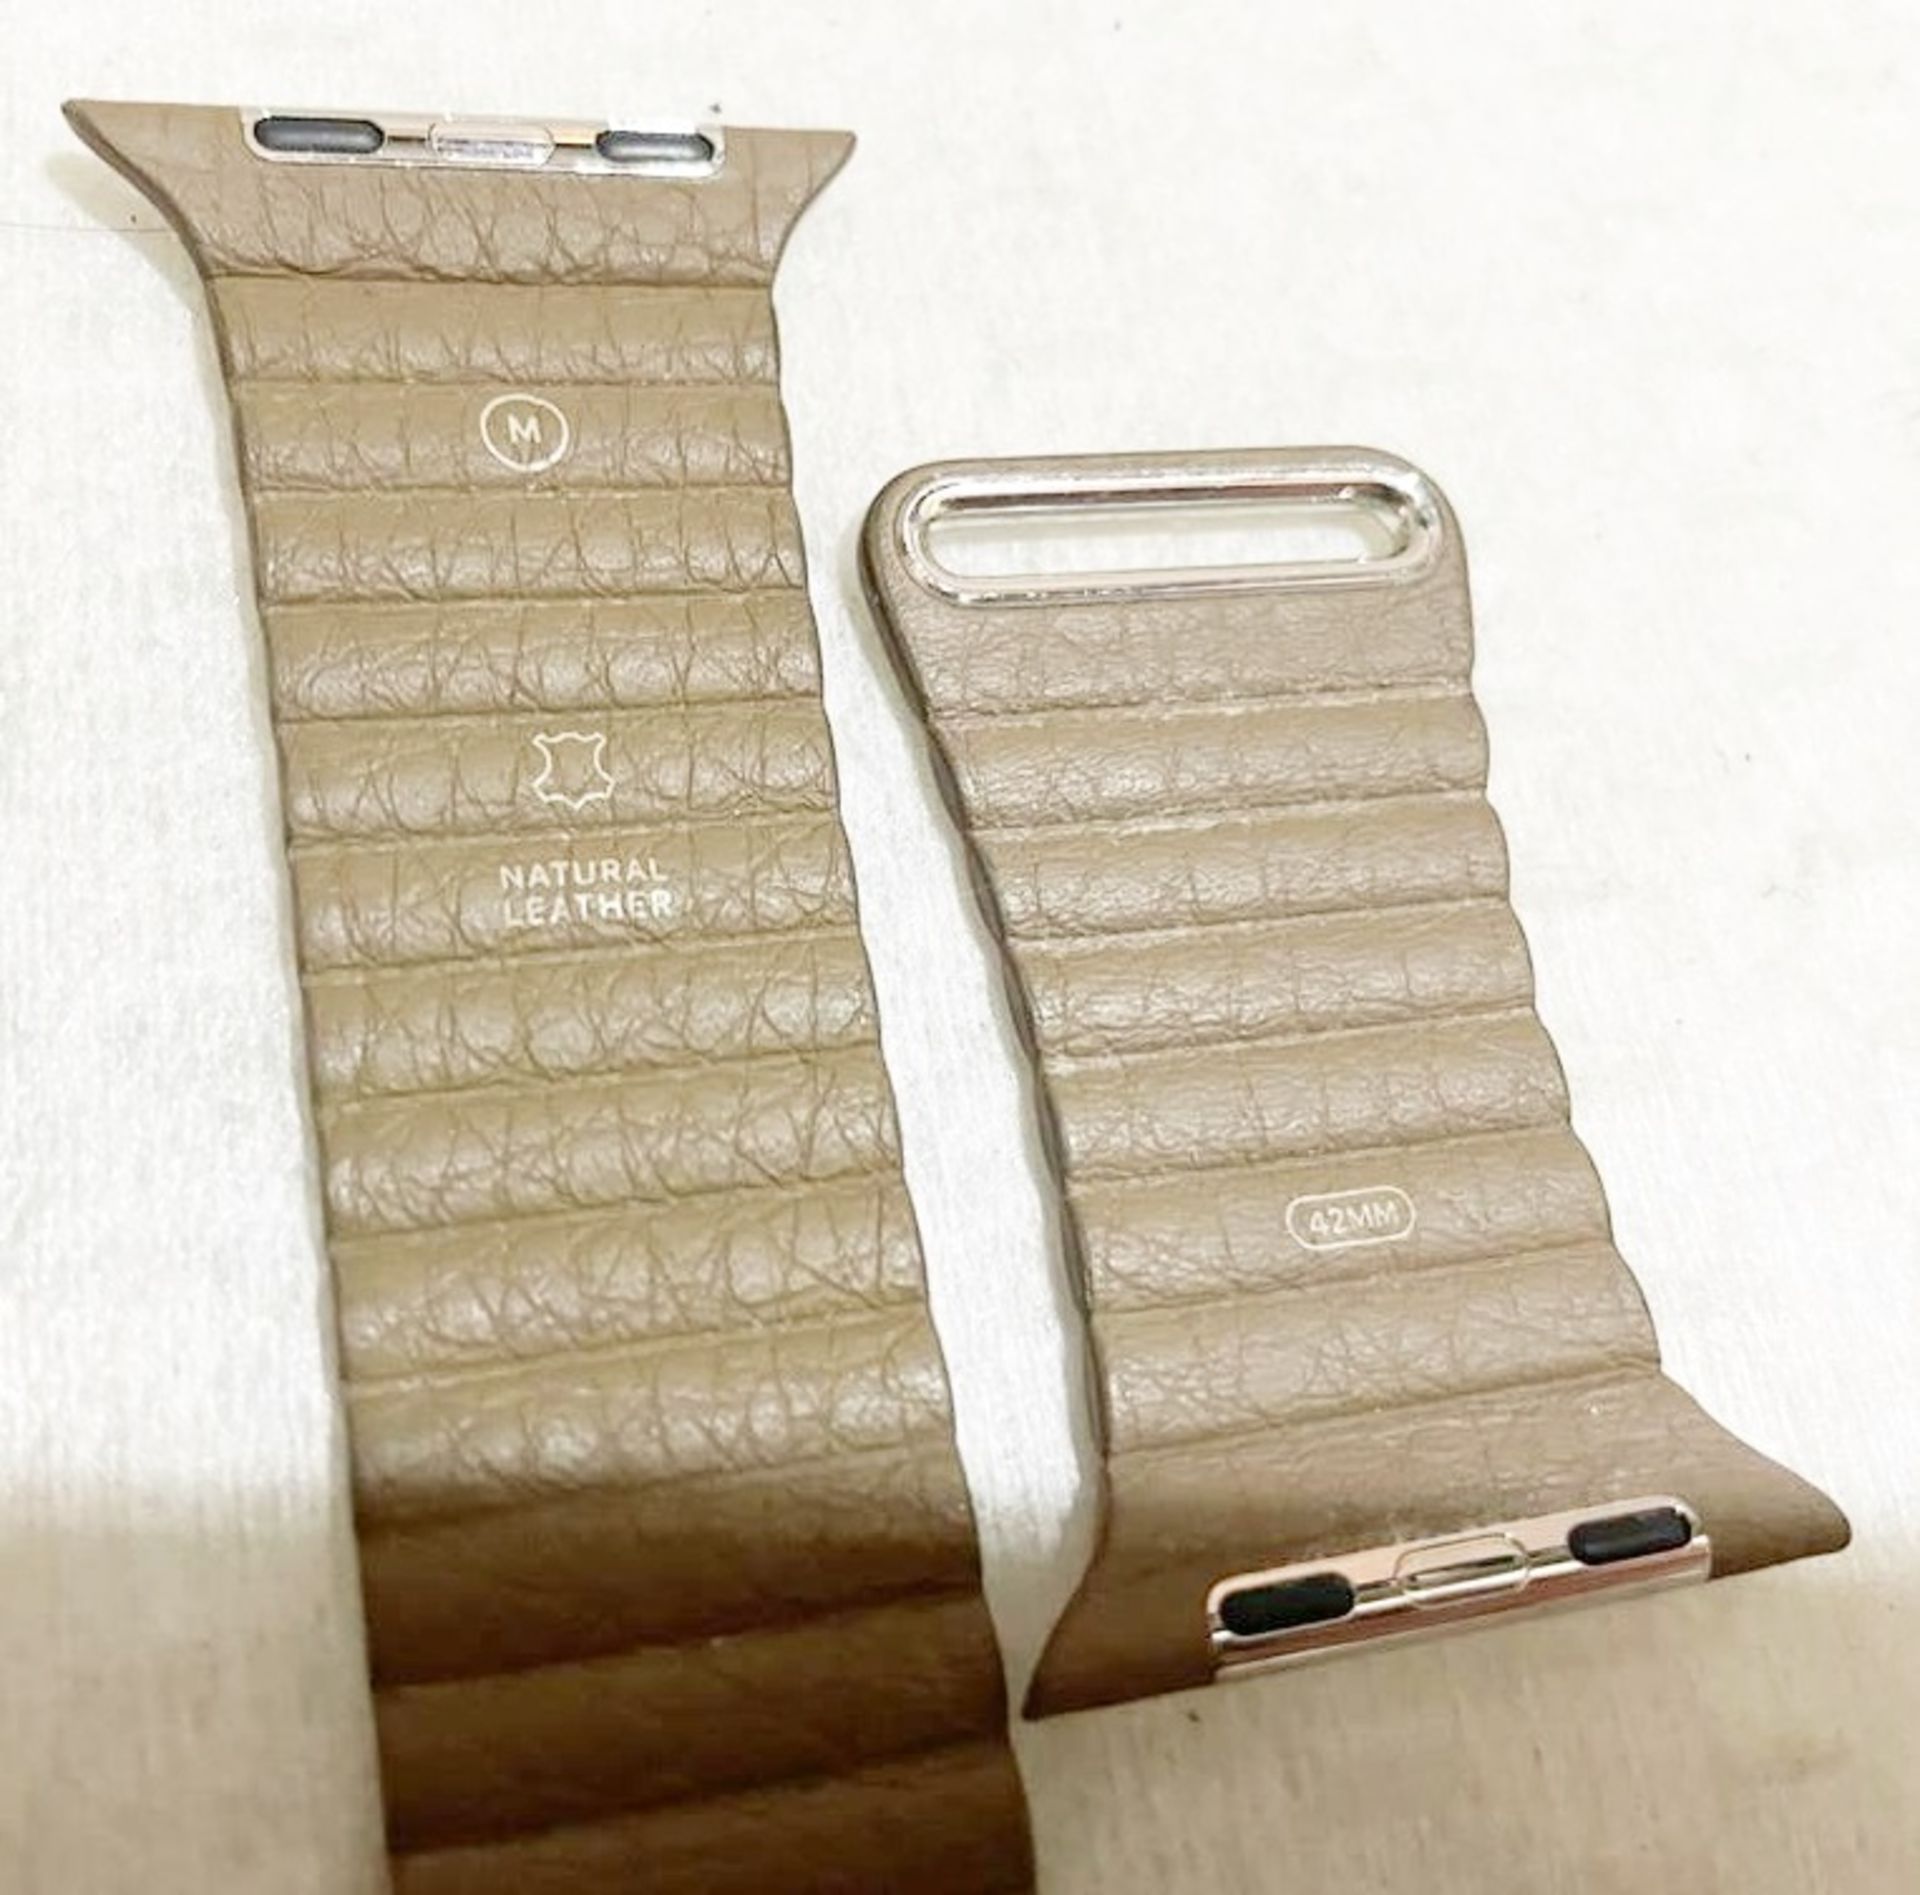 1 x APPLE WATCH Natural Leather 42mm Watch Strap - No VAT on the Hammer - CL712 - Ref: MPC852  - - Image 3 of 4